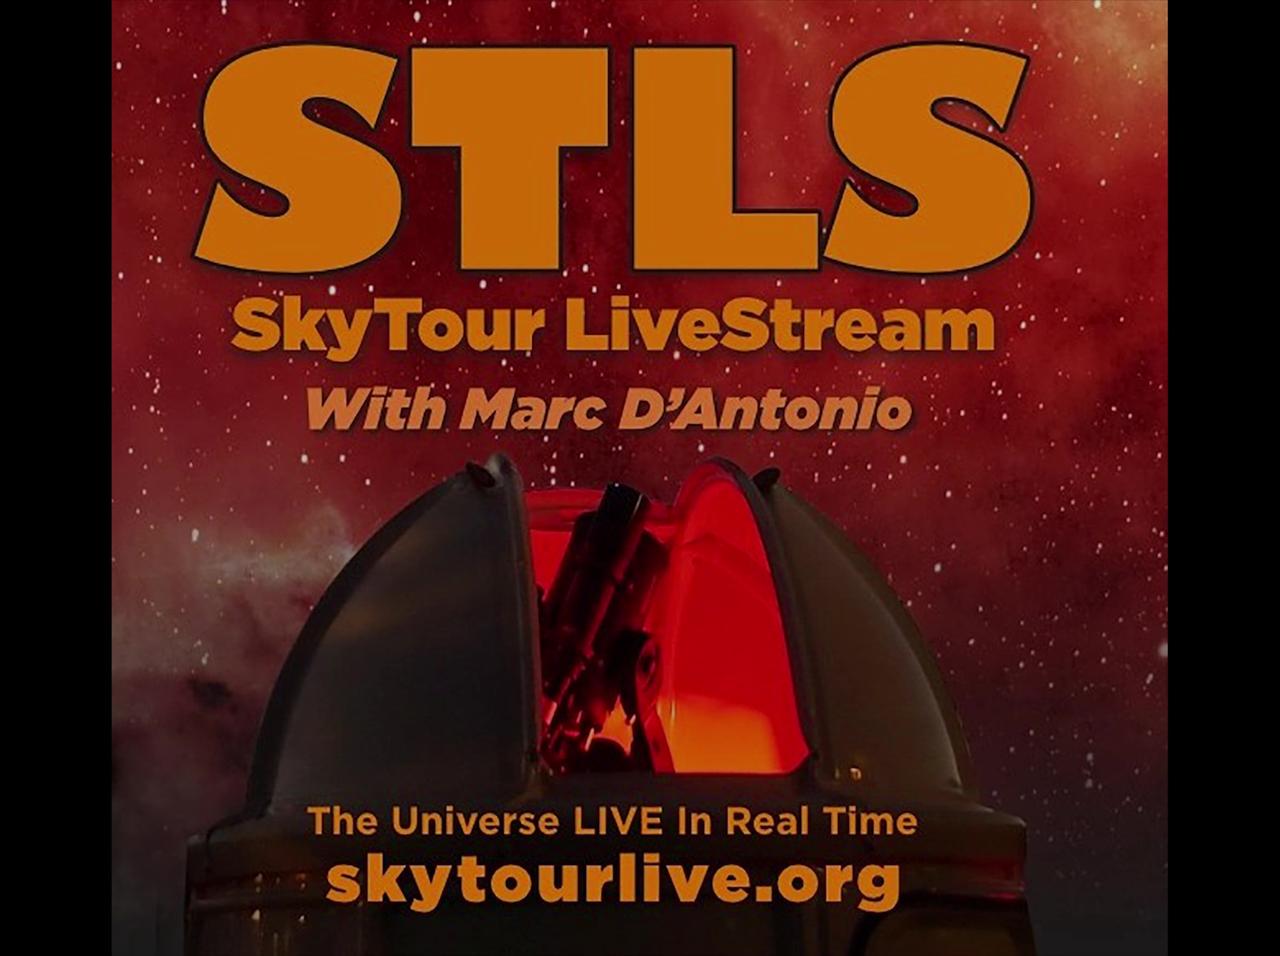 Summer Sky Live From Arizona with Bill Skywatcher